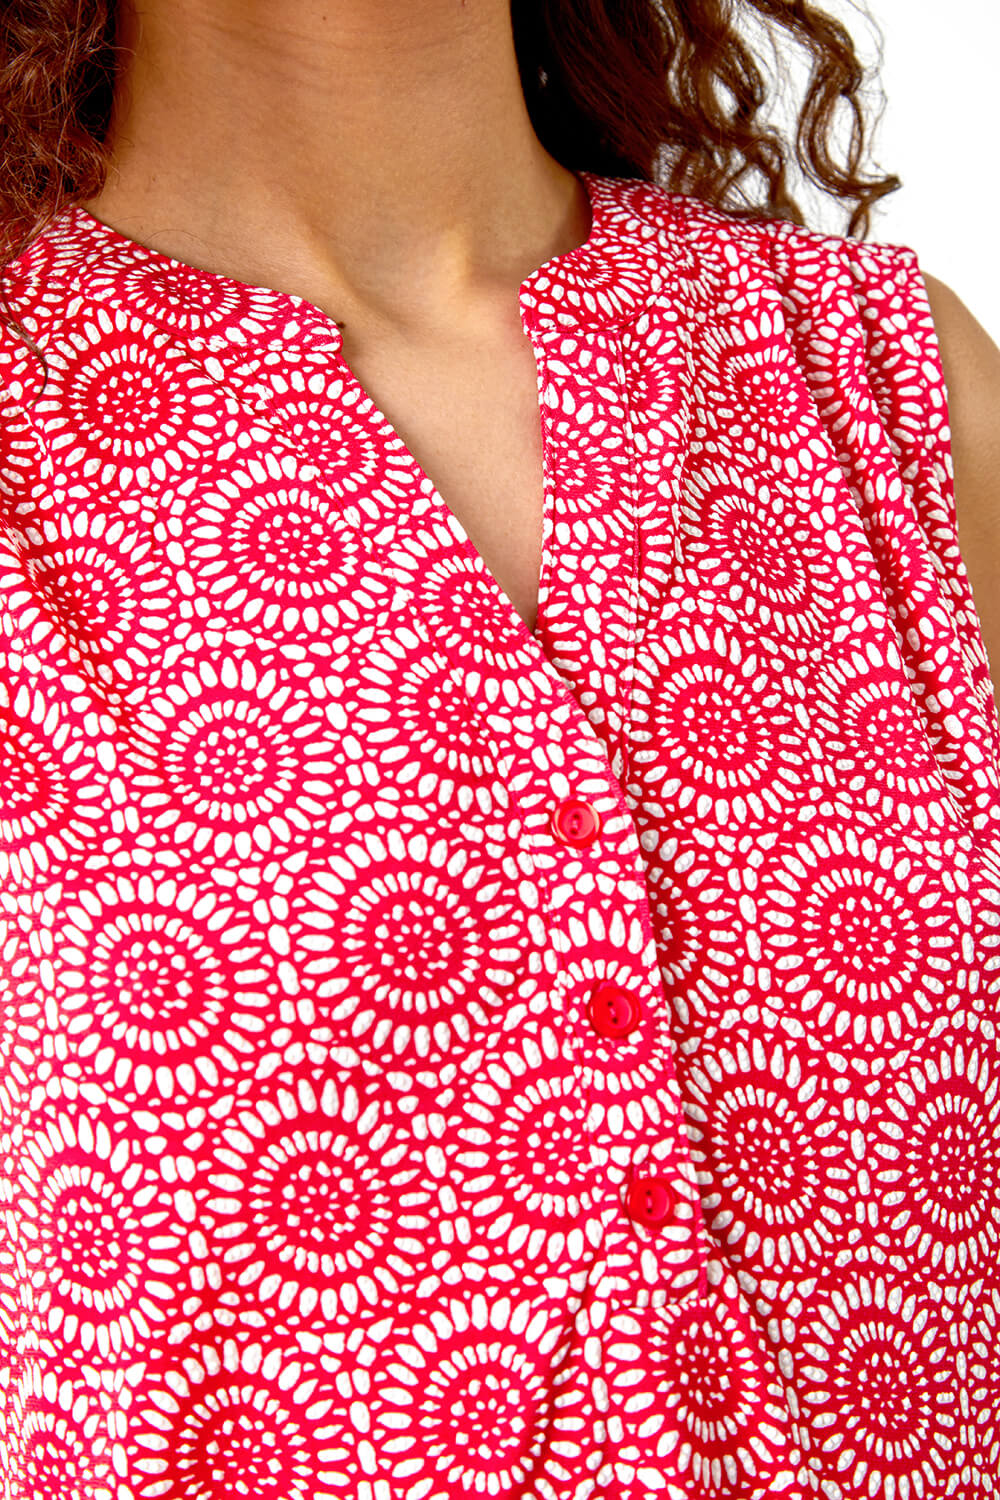 CORAL Mosaic Print Stretch Jersey Top, Image 5 of 5